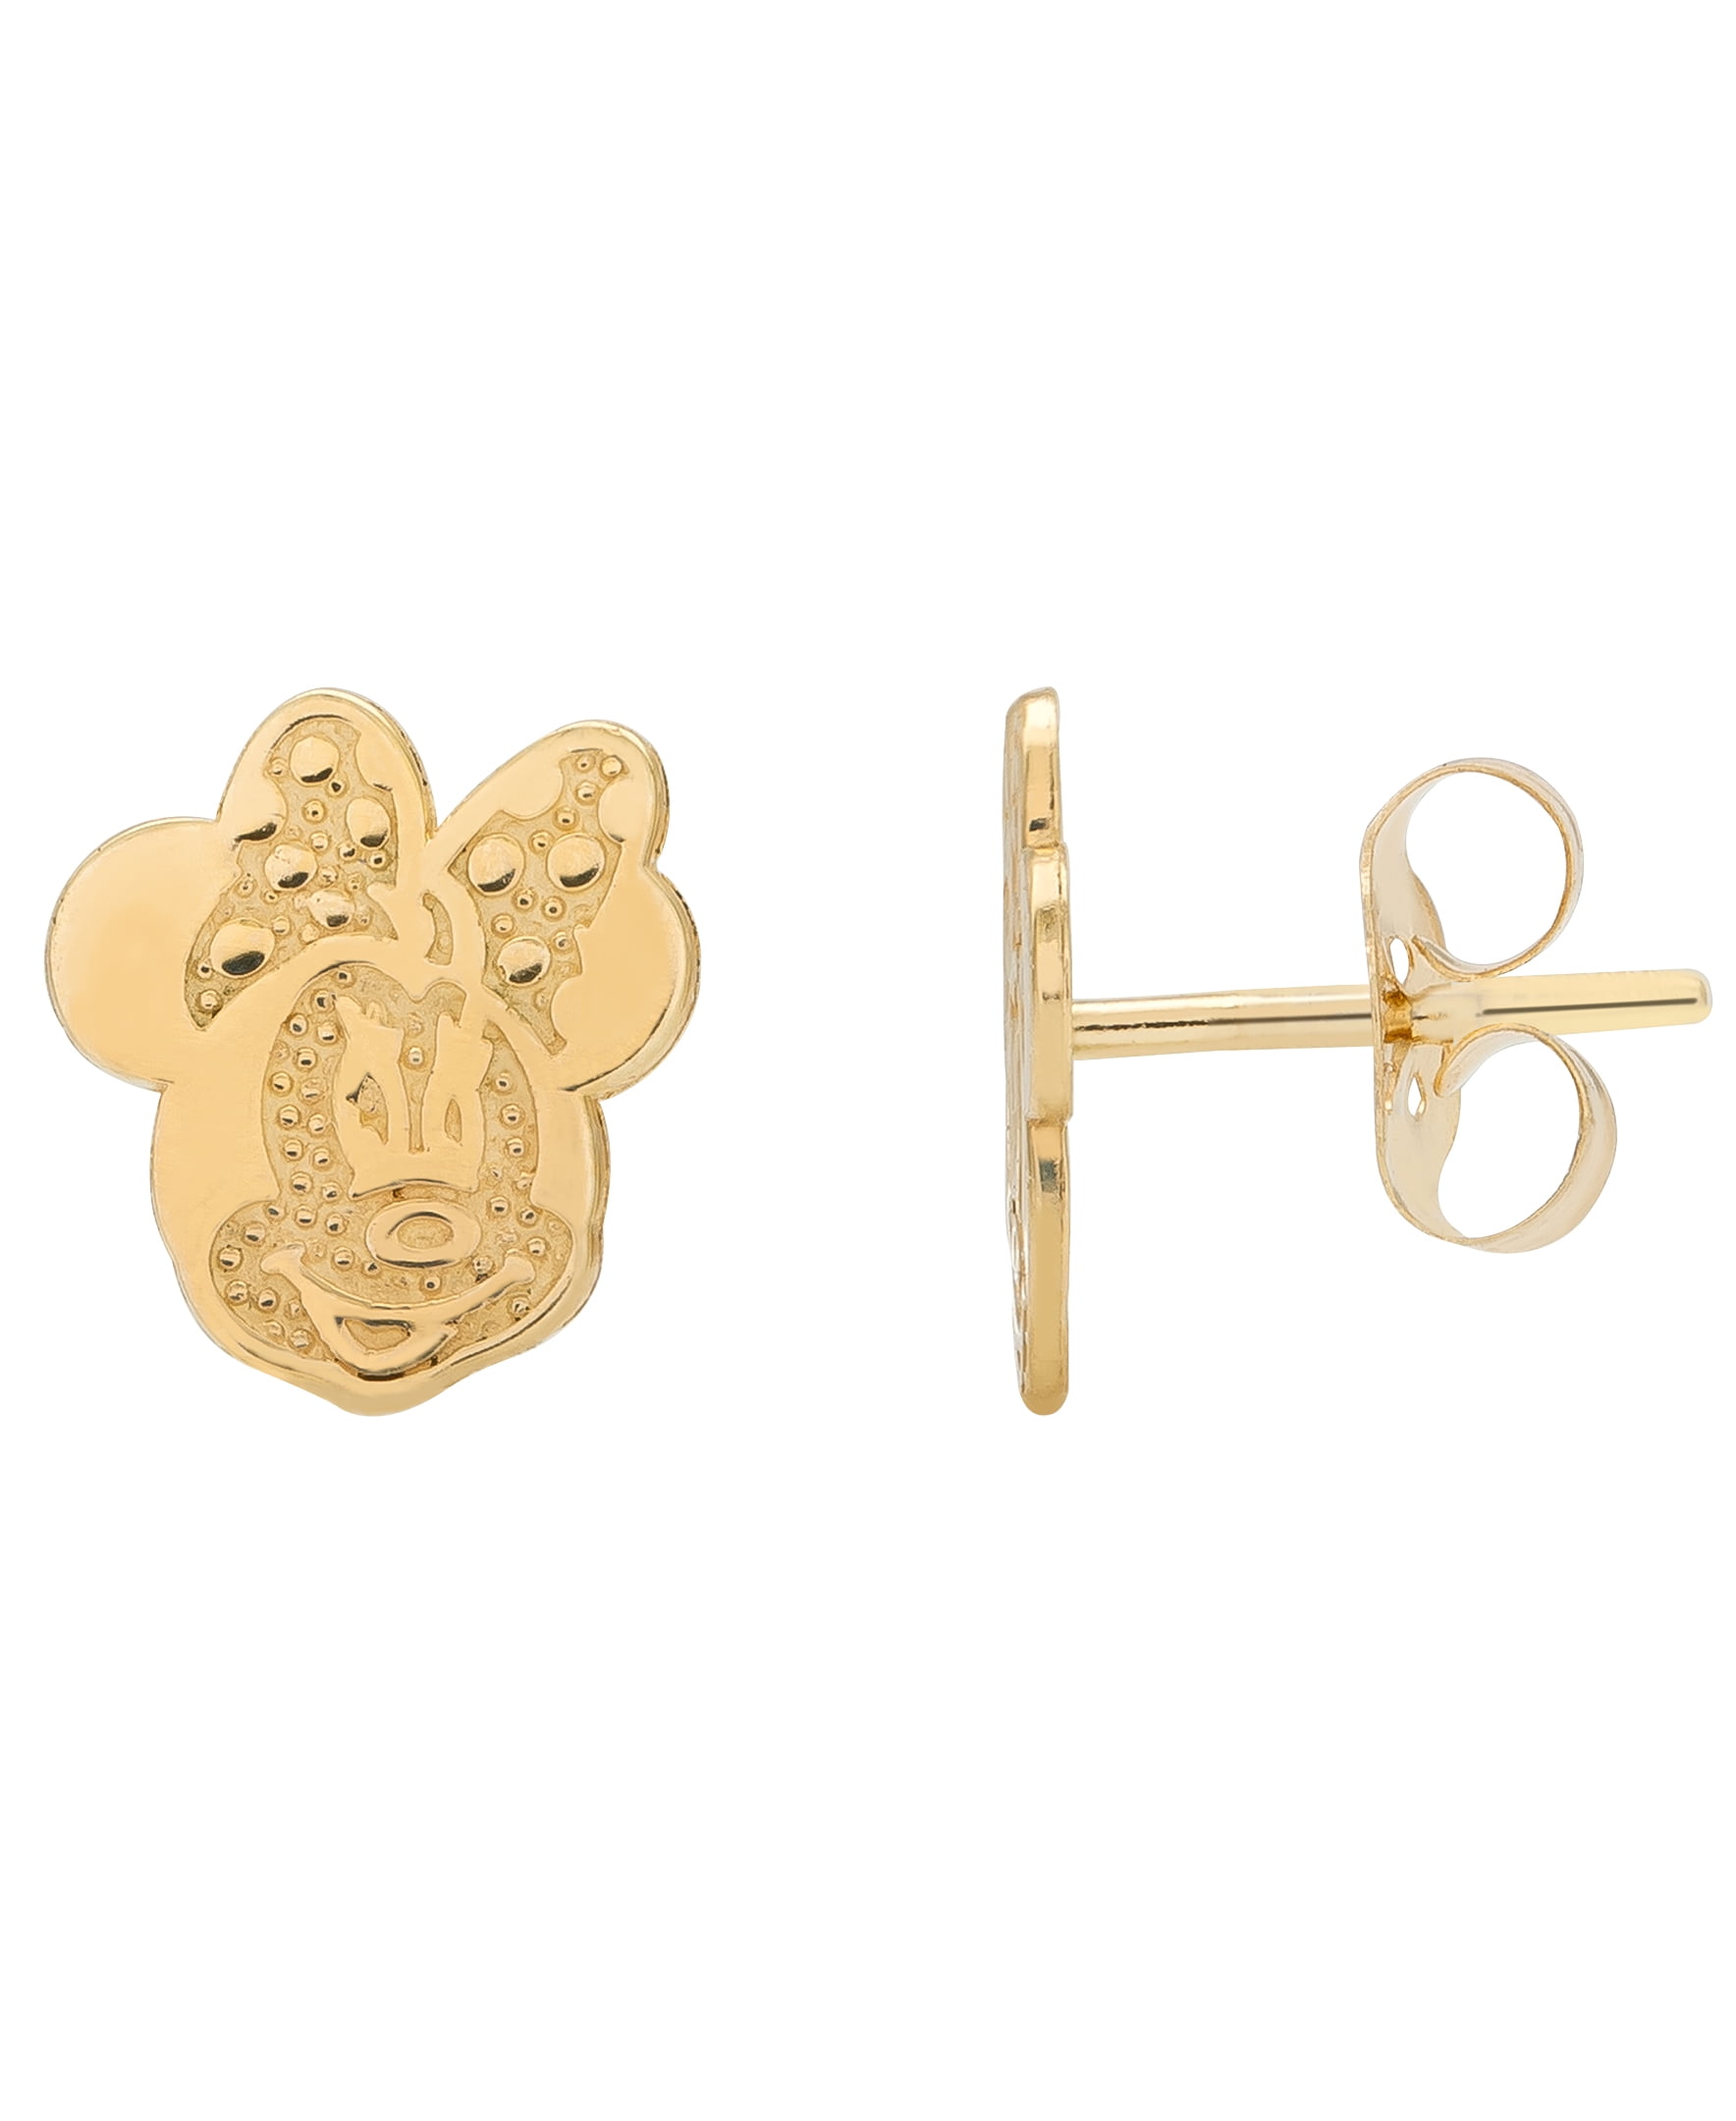 Disney 10KT Yellow Gold Minnie Mouse Earrings